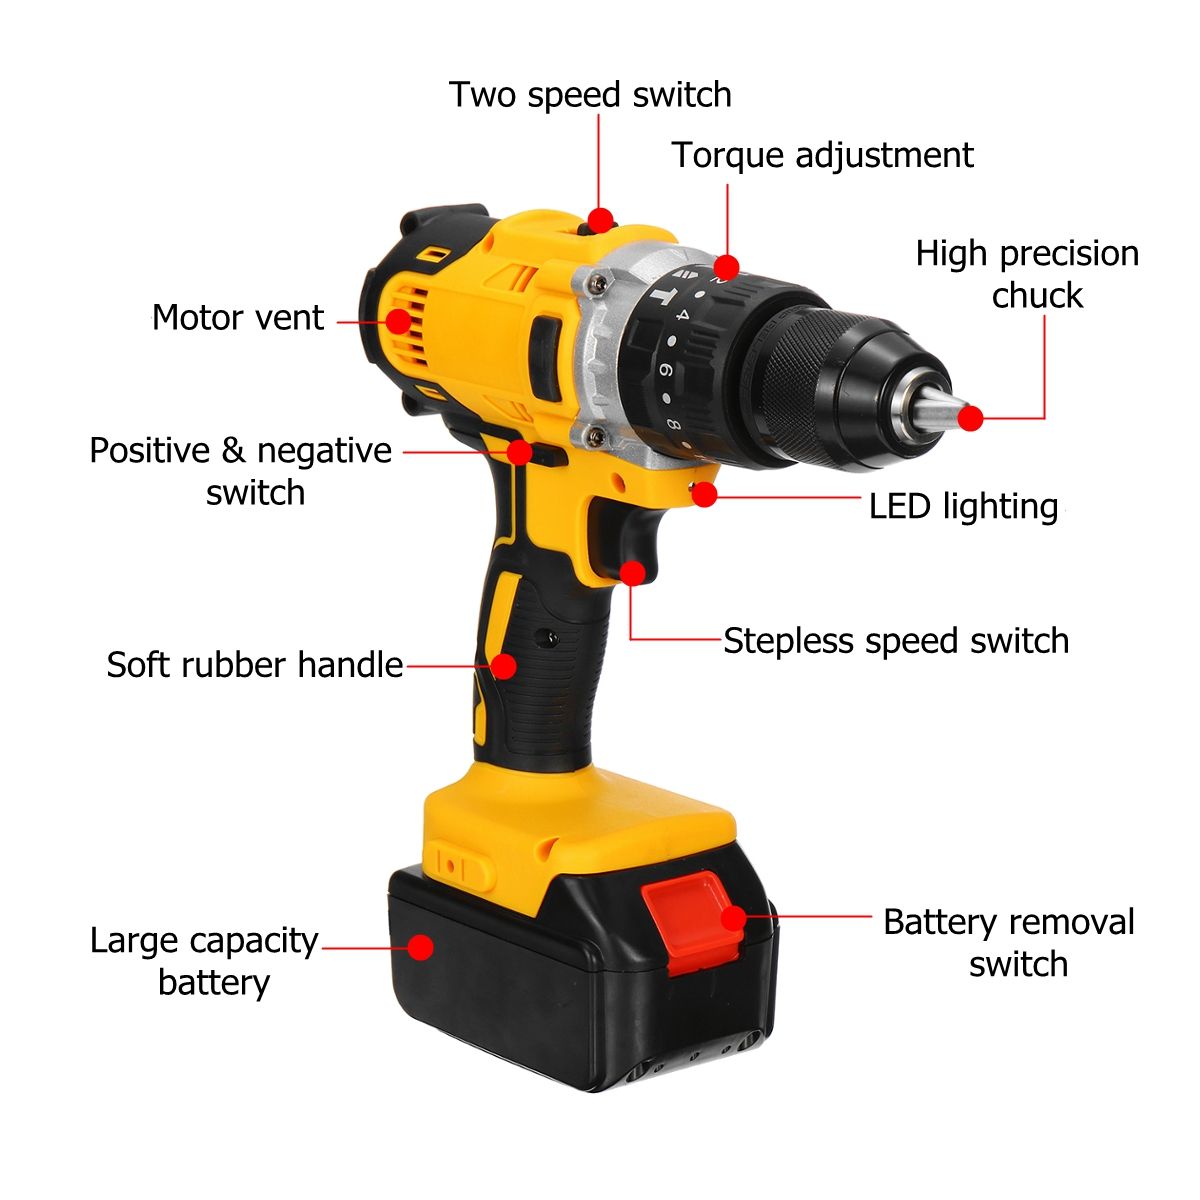 100-240V-AC-36V-3-In-1-Cordless-150Nm-Torque-Impact-Drill-Screwdriver-Wrench-2-Speeds-Adjustment-LED-1631481